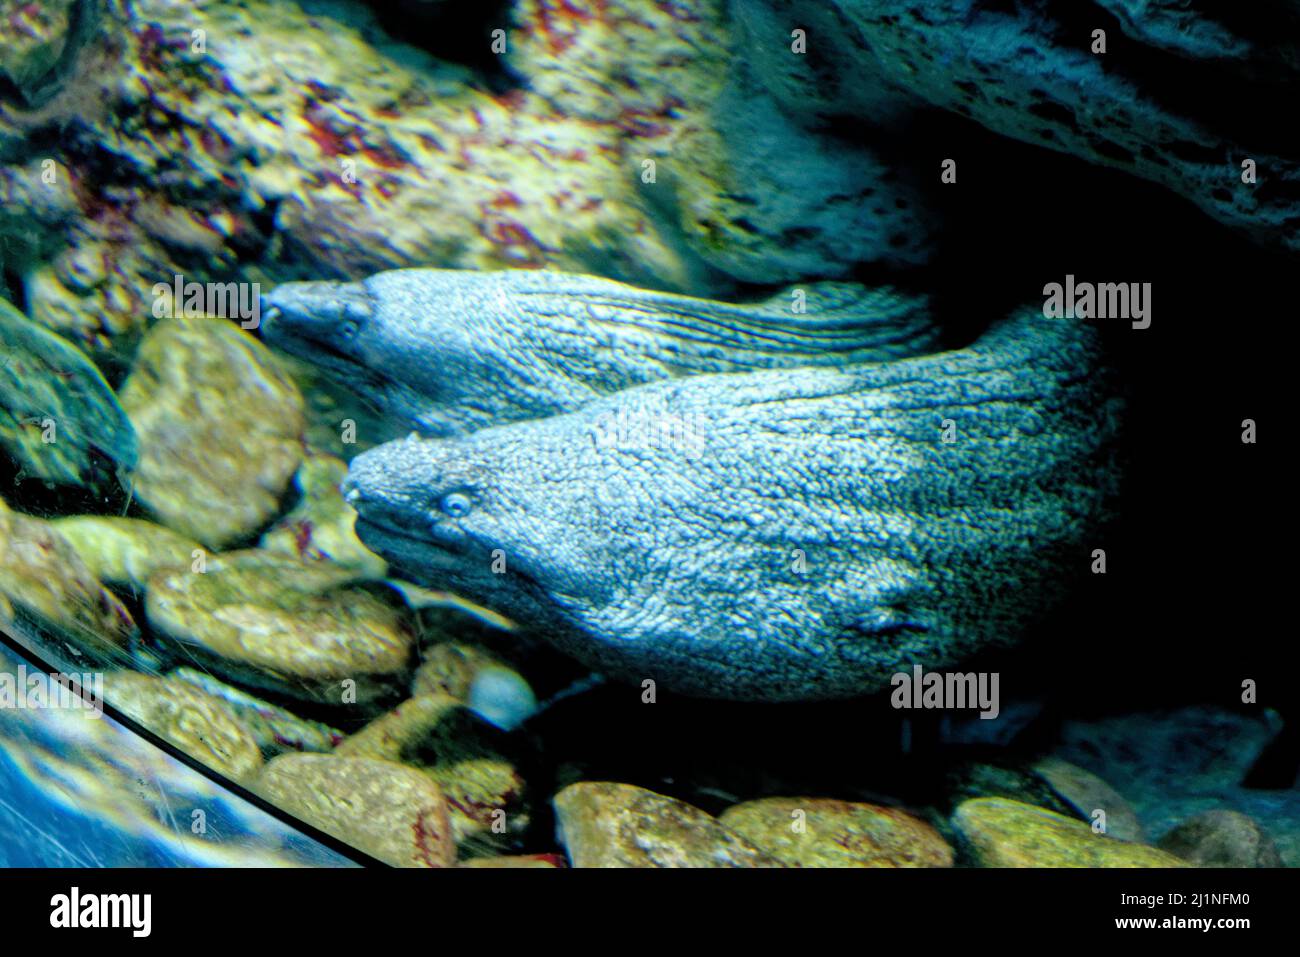 The Mediterranean moray is a fish of the moray eel family. Its bite can be dangerous to humans. Stock Photo